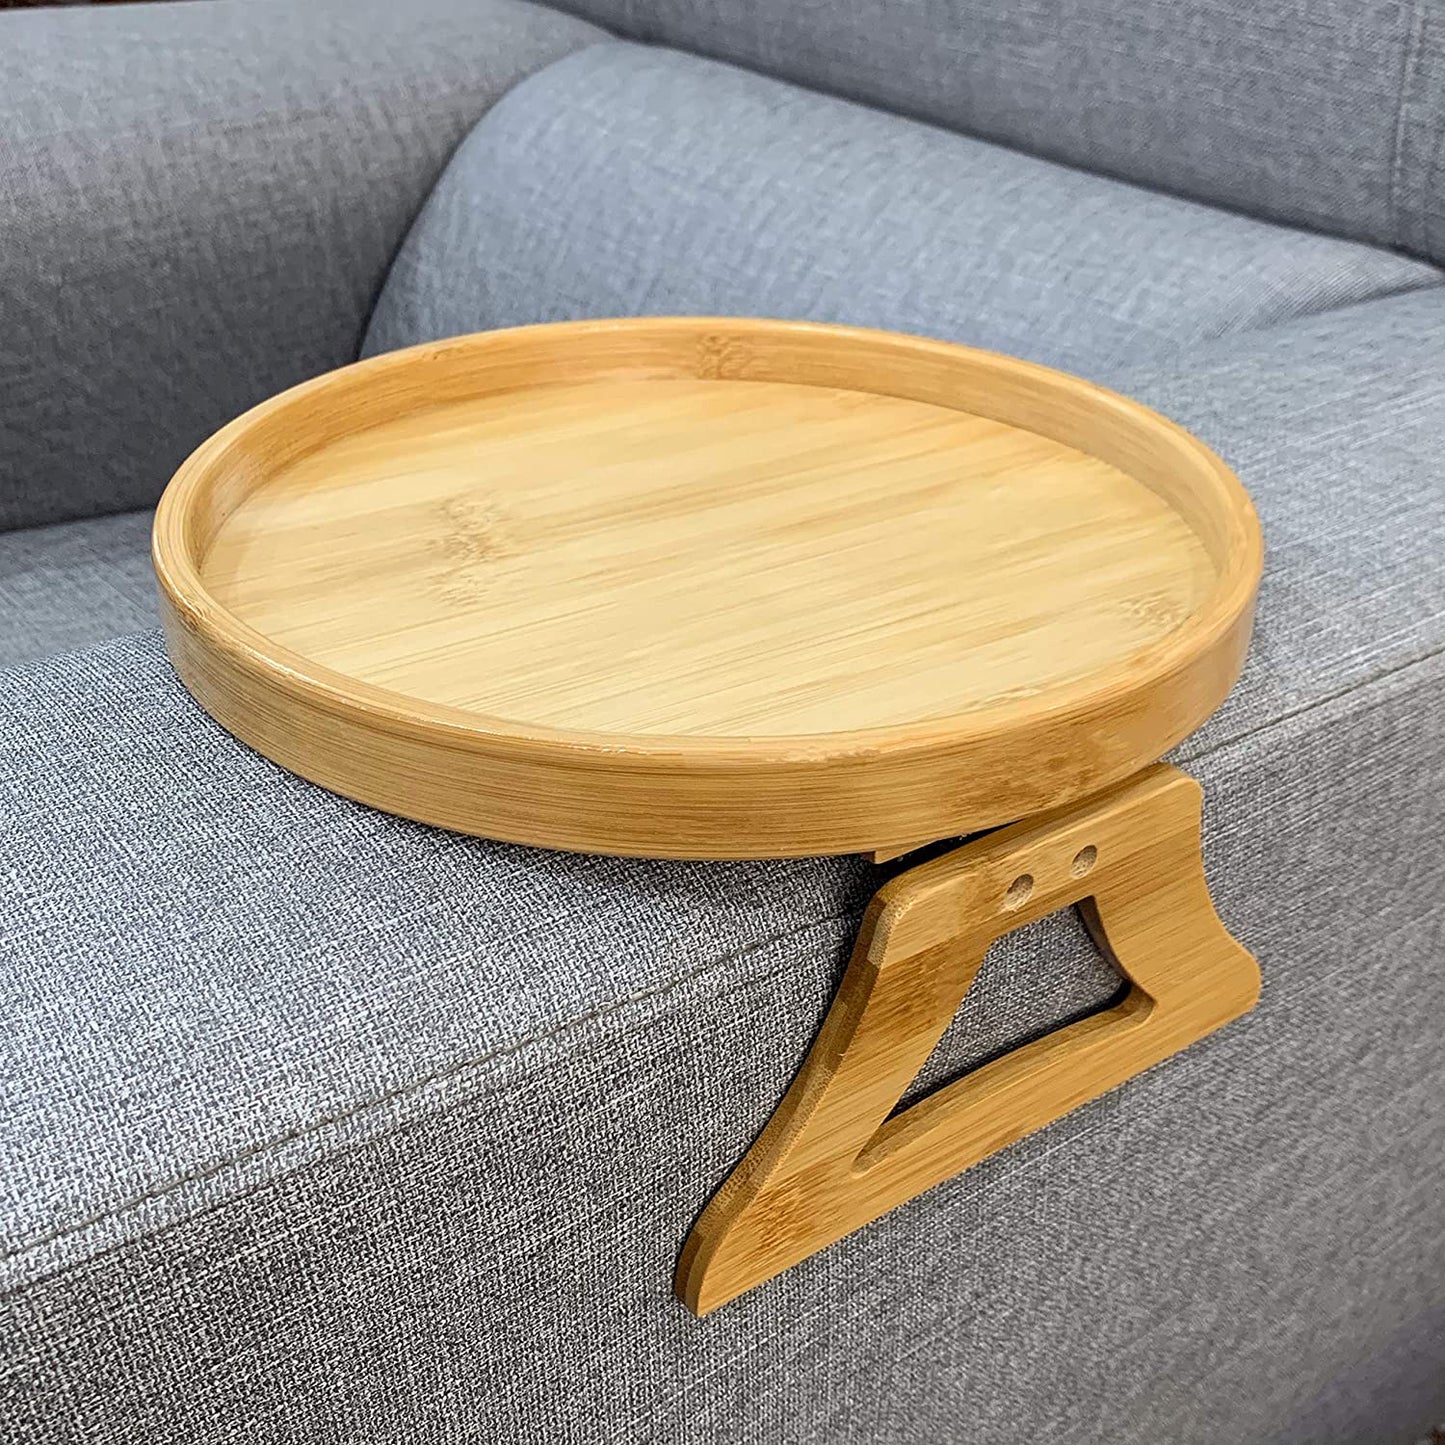 Clip On Tray Sofa Arm Table for Wide Couches. Couch Arm Tray Table, Portable TV Table and Side Tables for Small Spaces. Stable Sofa Arm Table for Eating and Drink Table (Wood grain Bamboo)